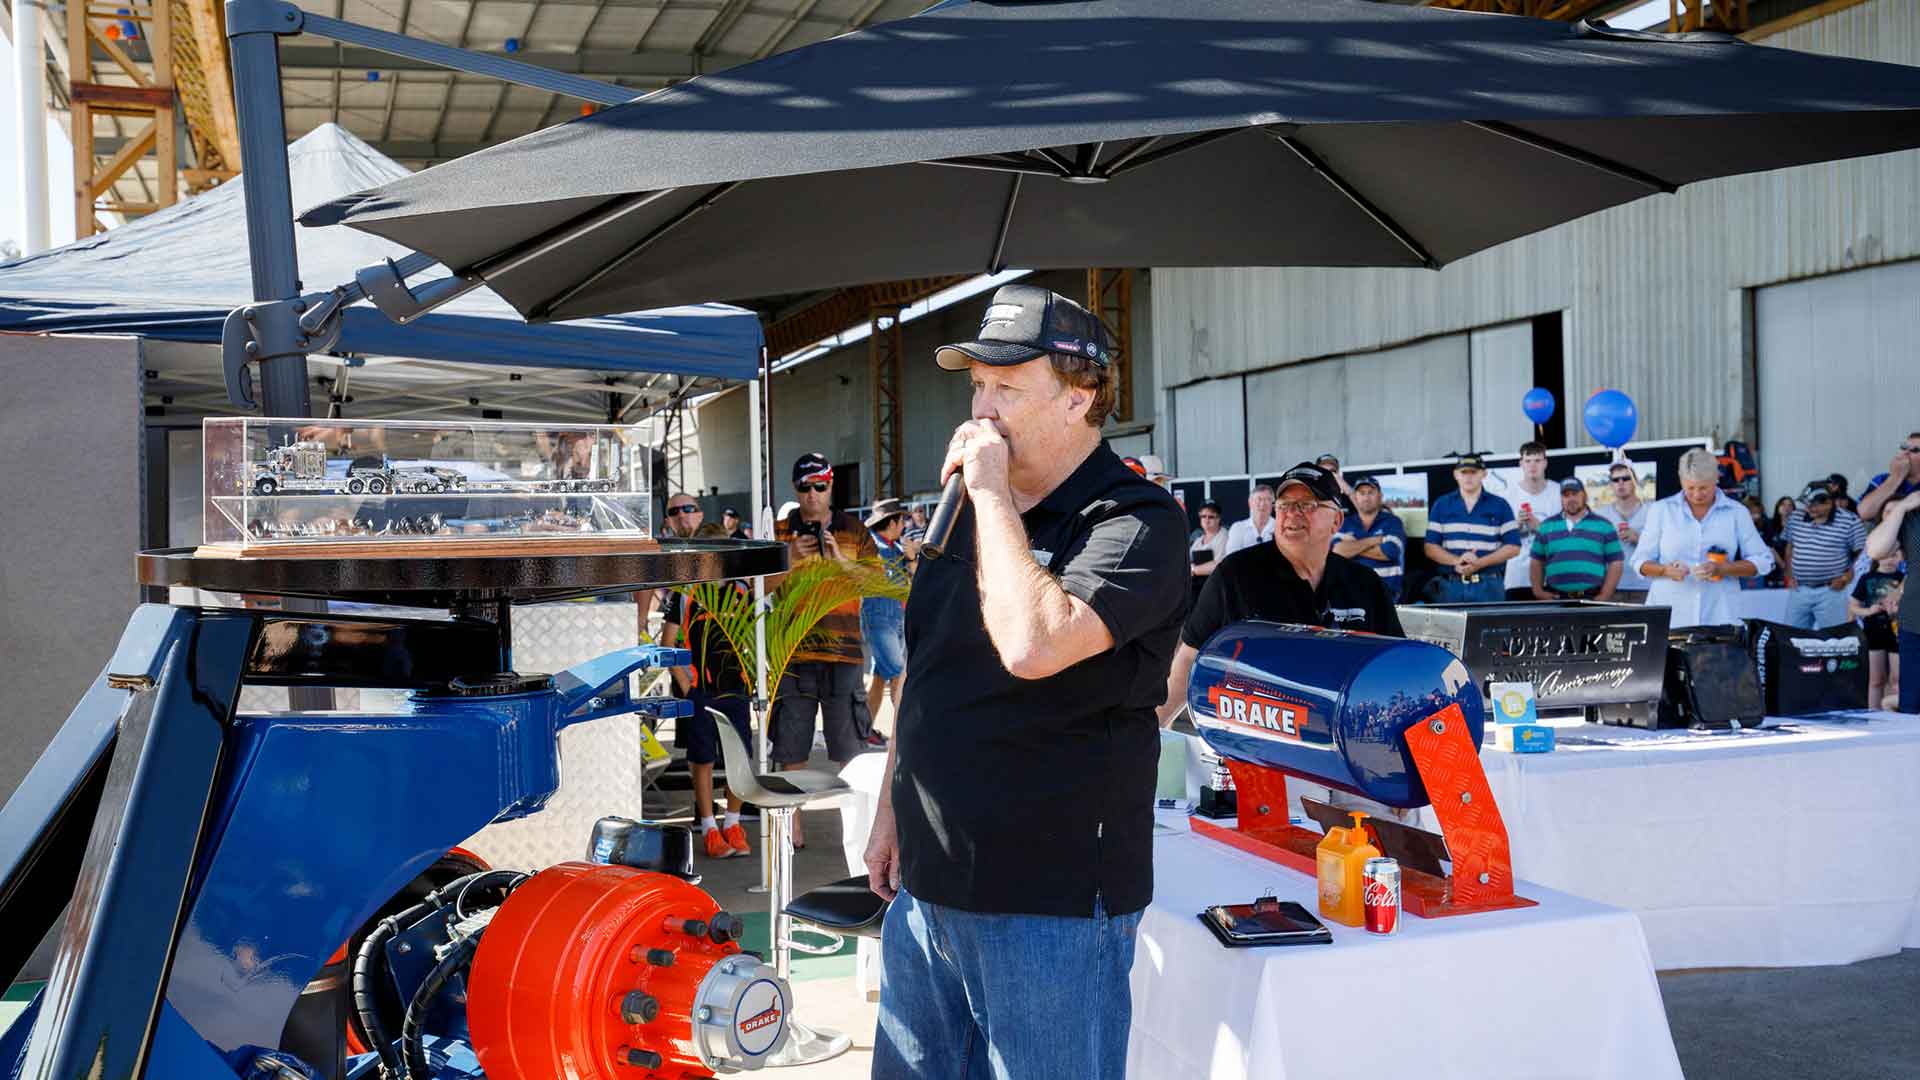 We wrap up the 2018 Drake Group Open Day